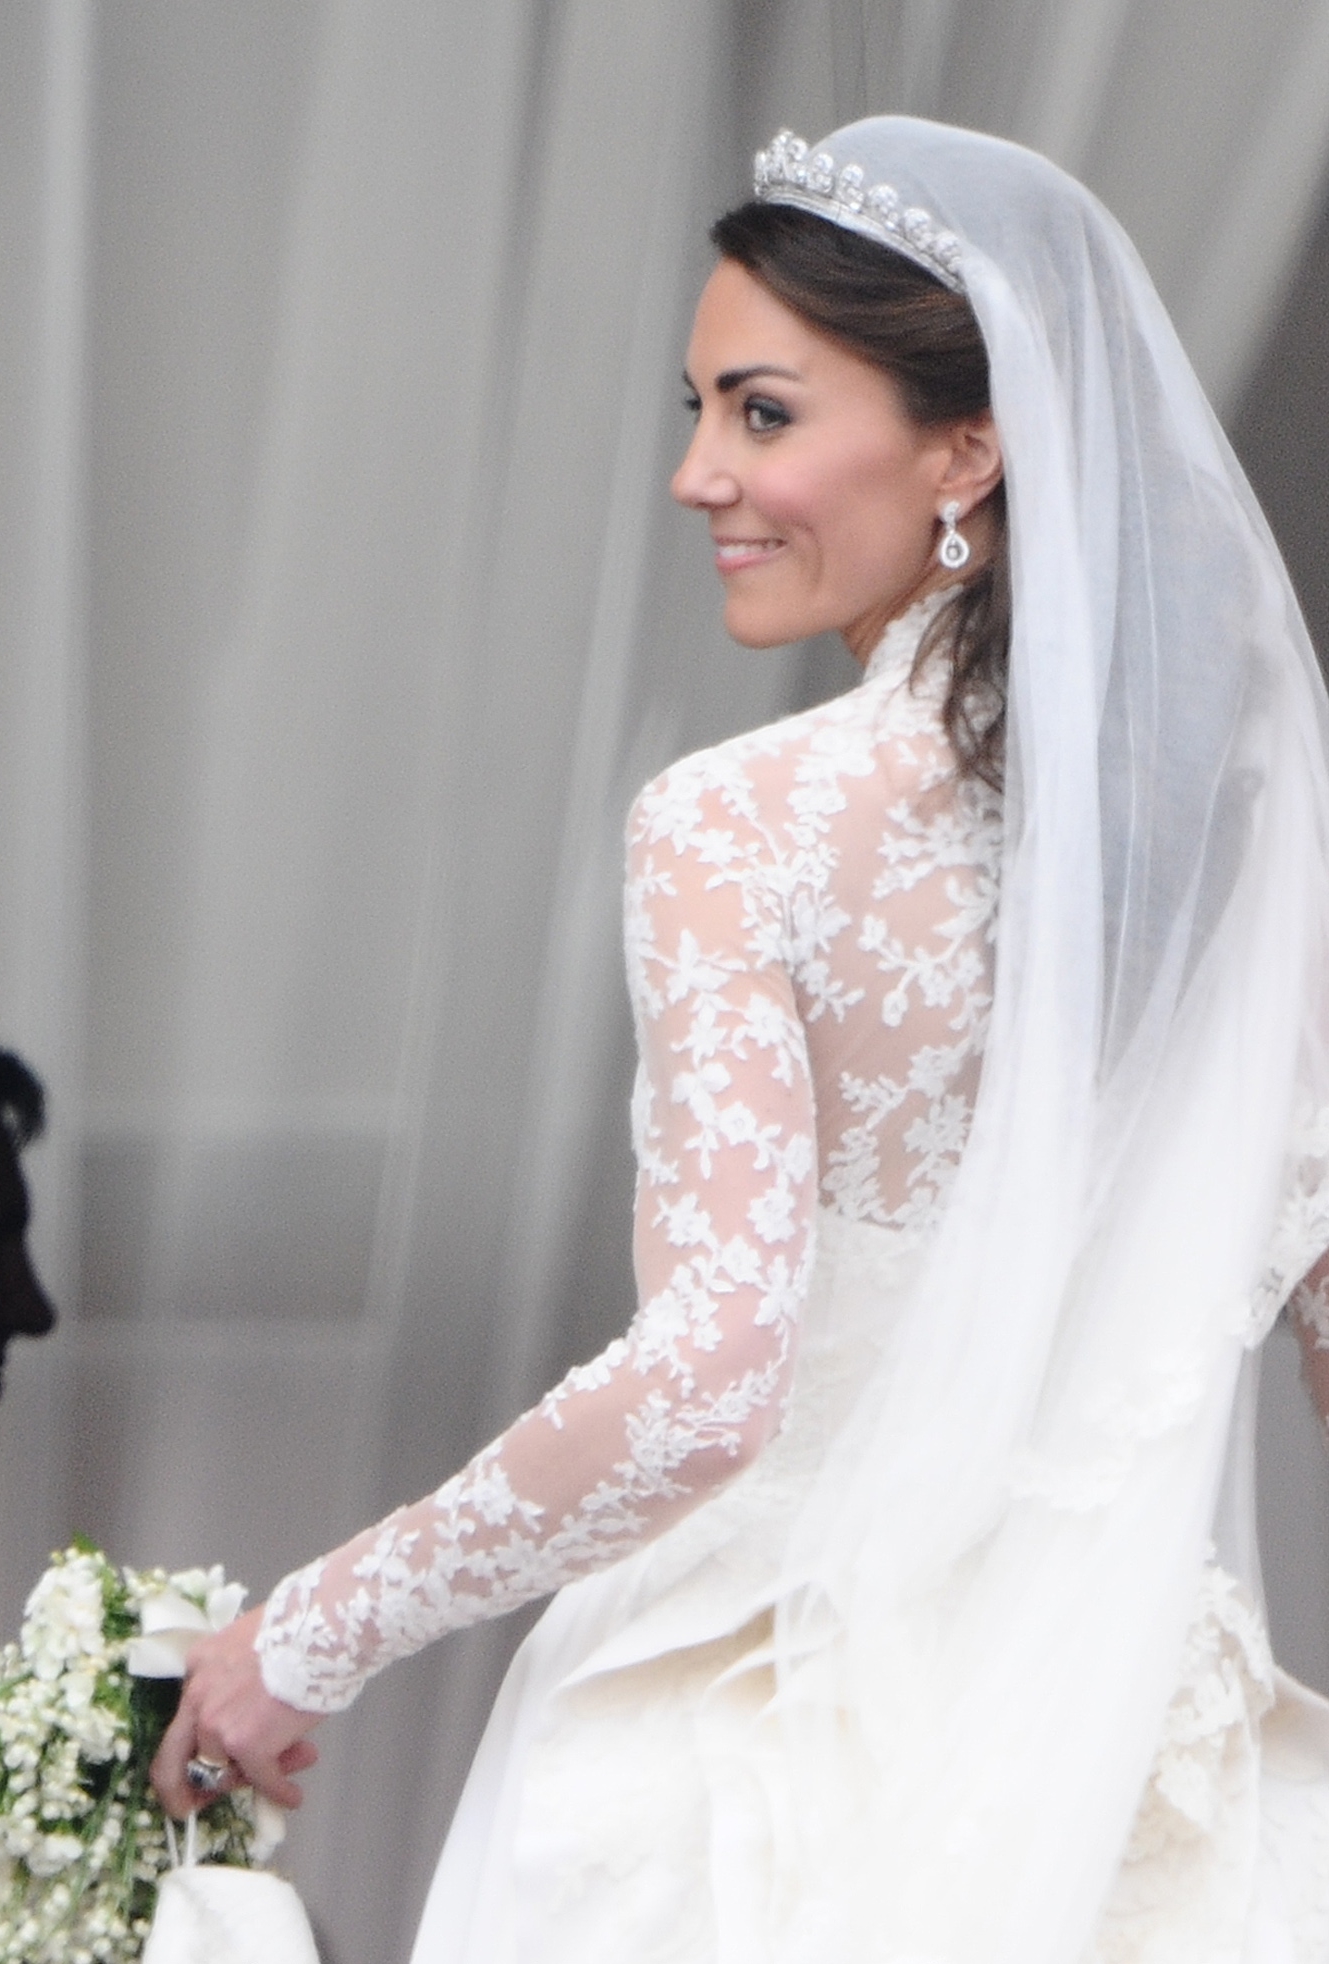 Kate Middleton Turns And Smiles As She Leaves The Balcony On Her Wedding Day ?w=693&h=1024